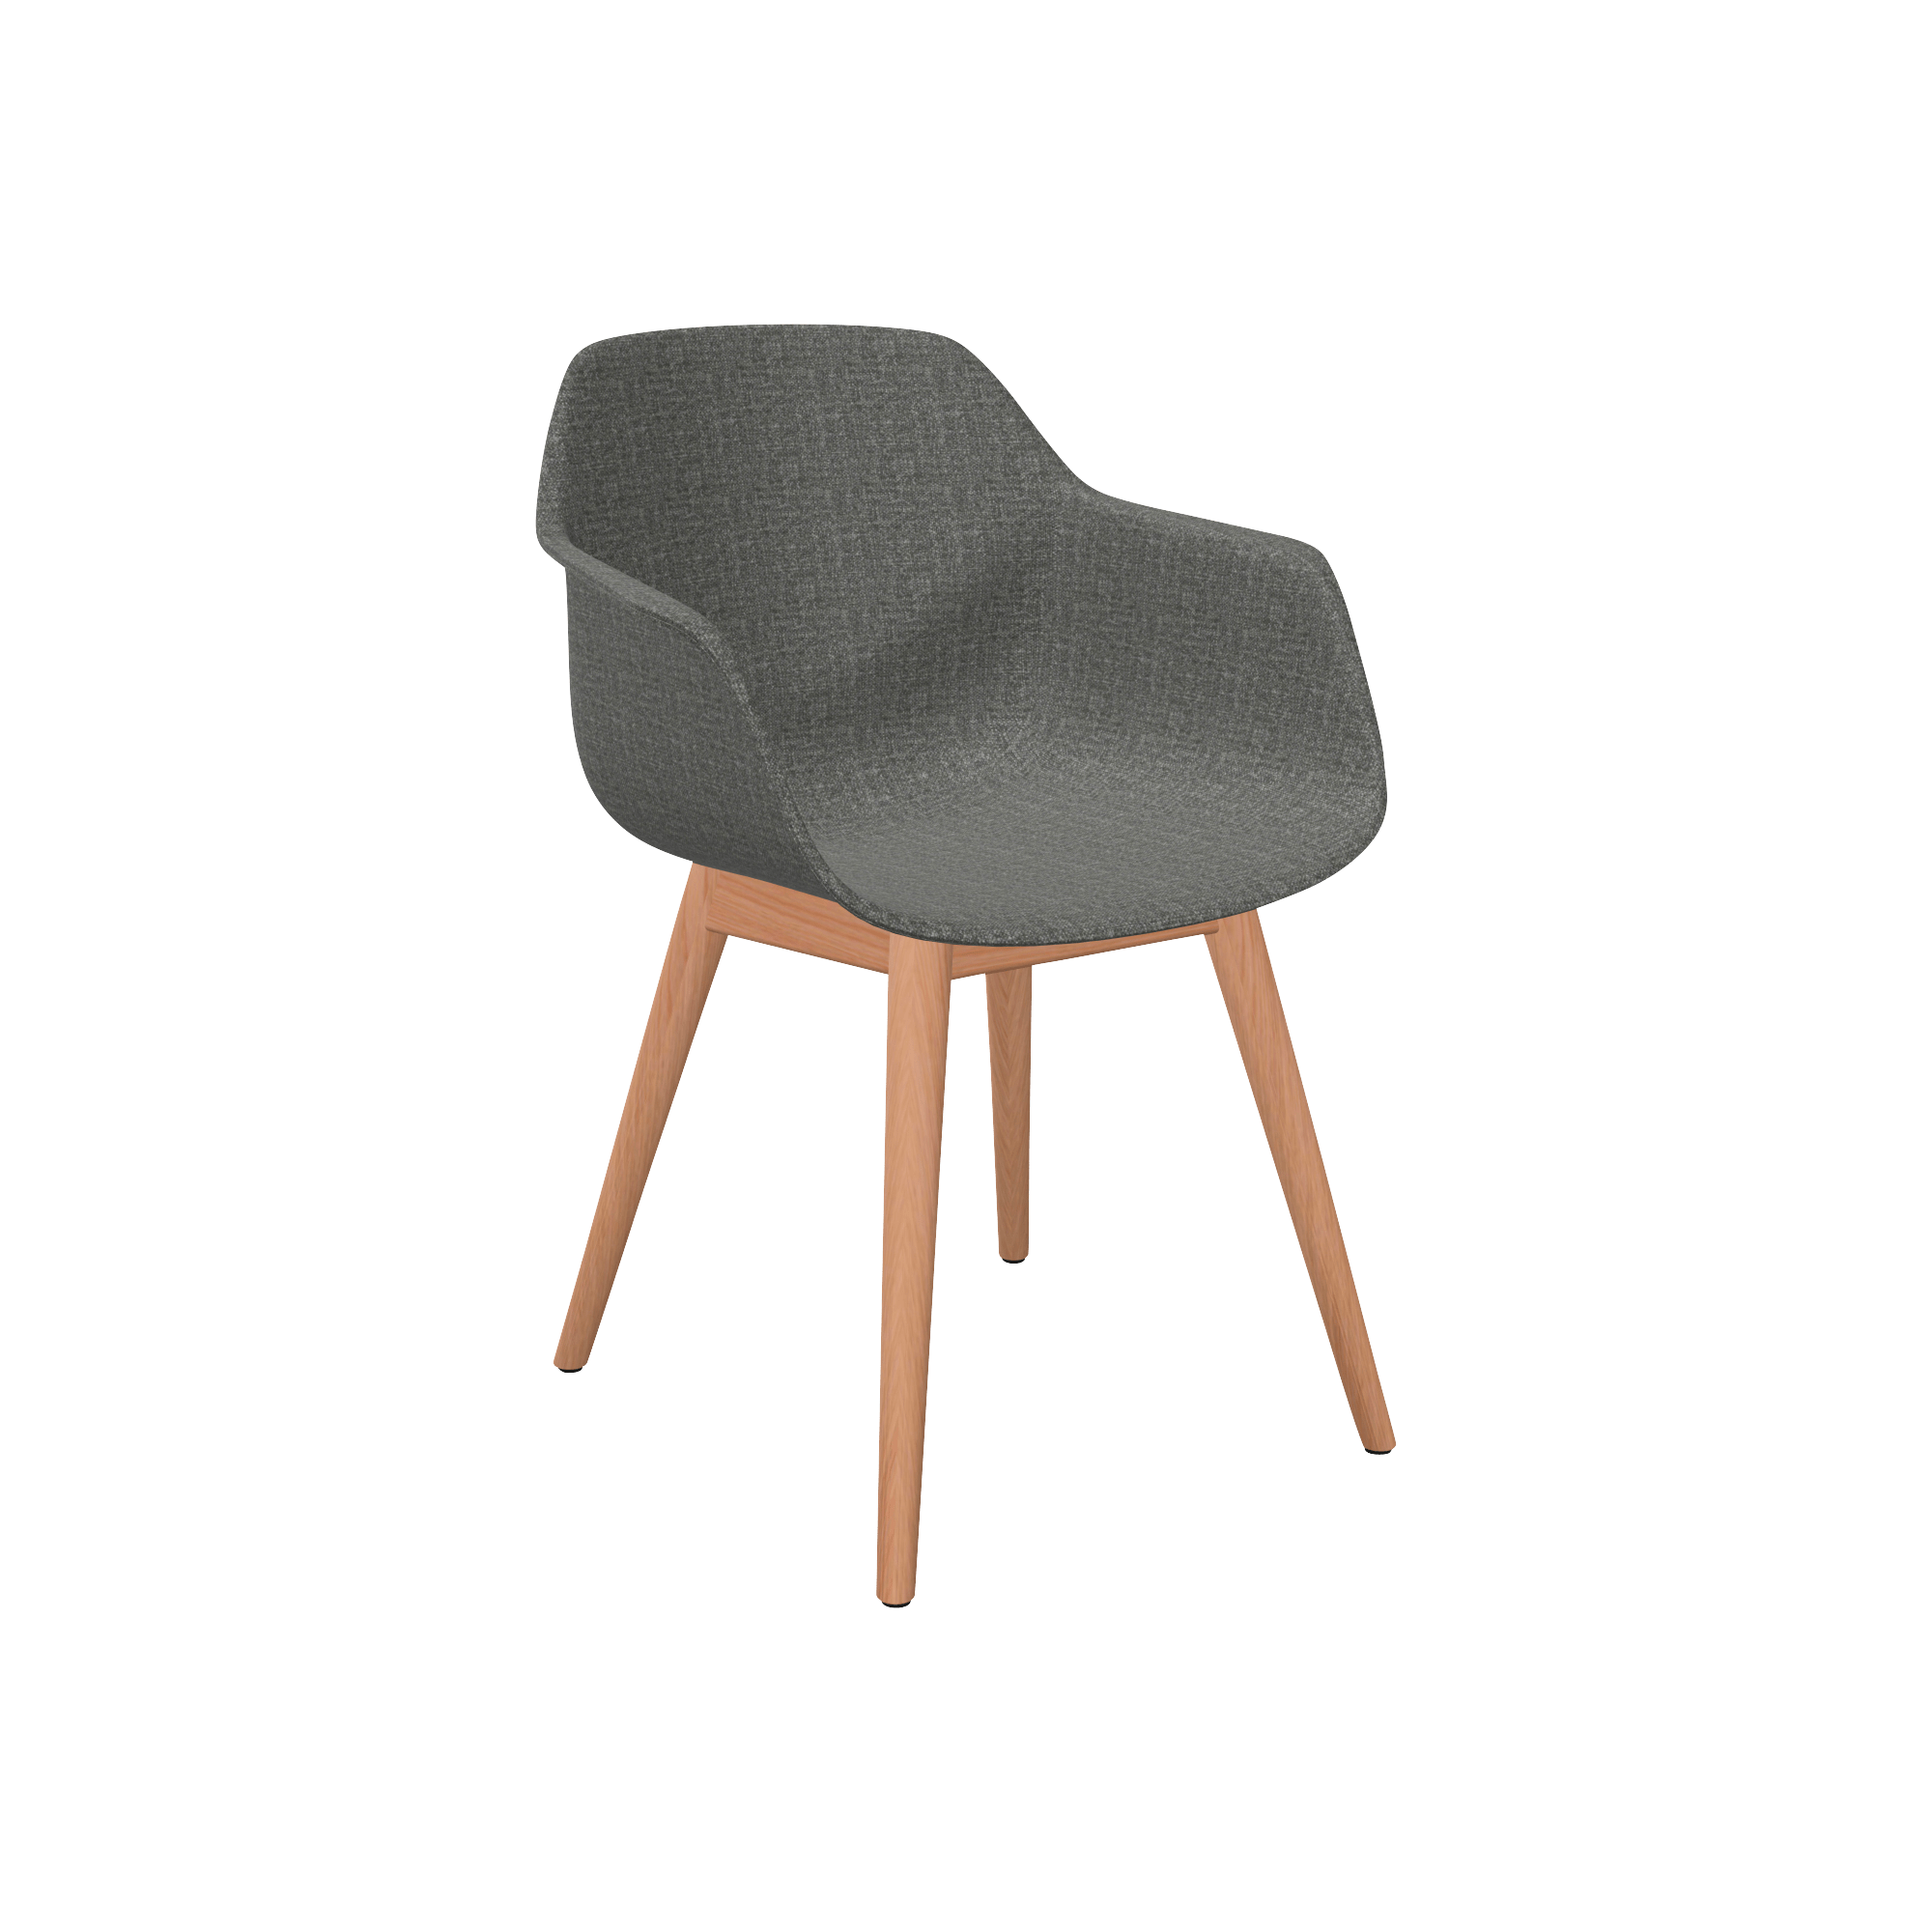 A grey upholstered chair with wooden legs.